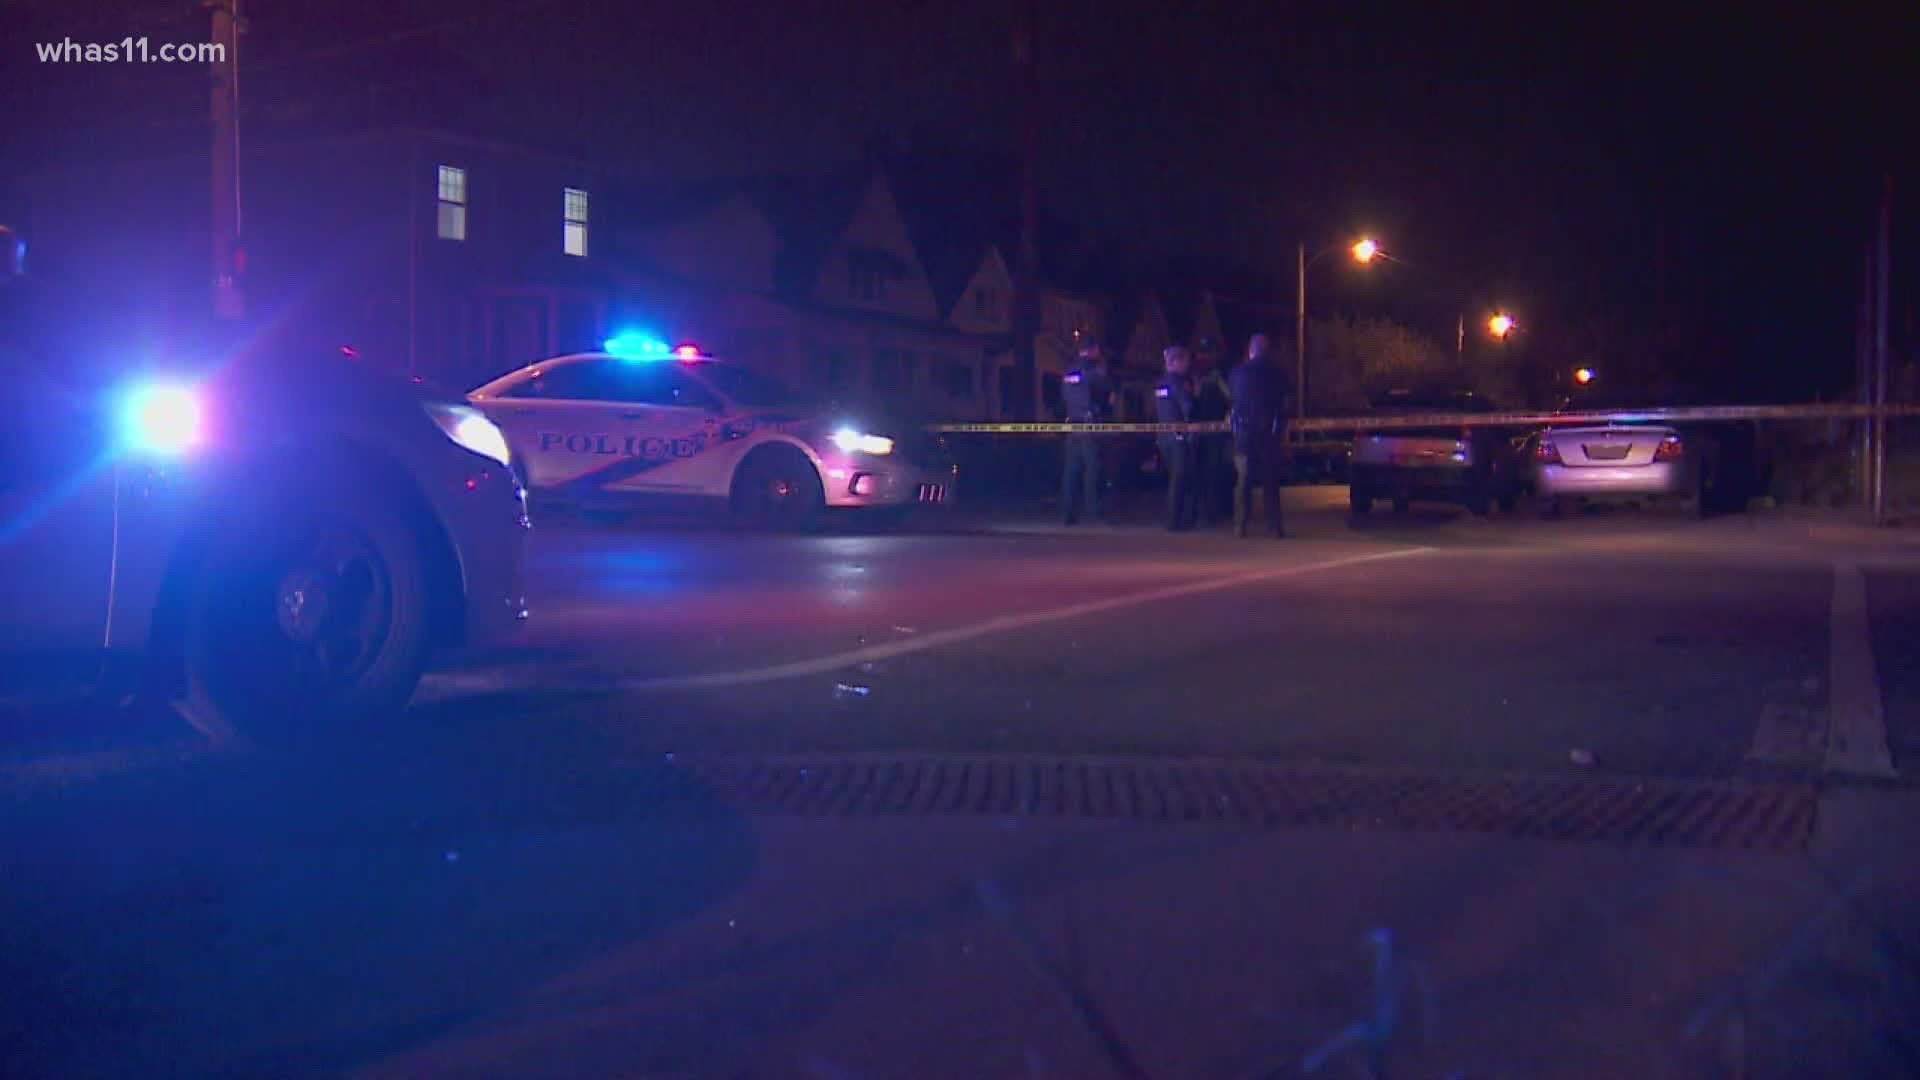 A 14-year-old boy was shot in the 2200 block of W. Oak St. around 6:25 a.m. October 7.